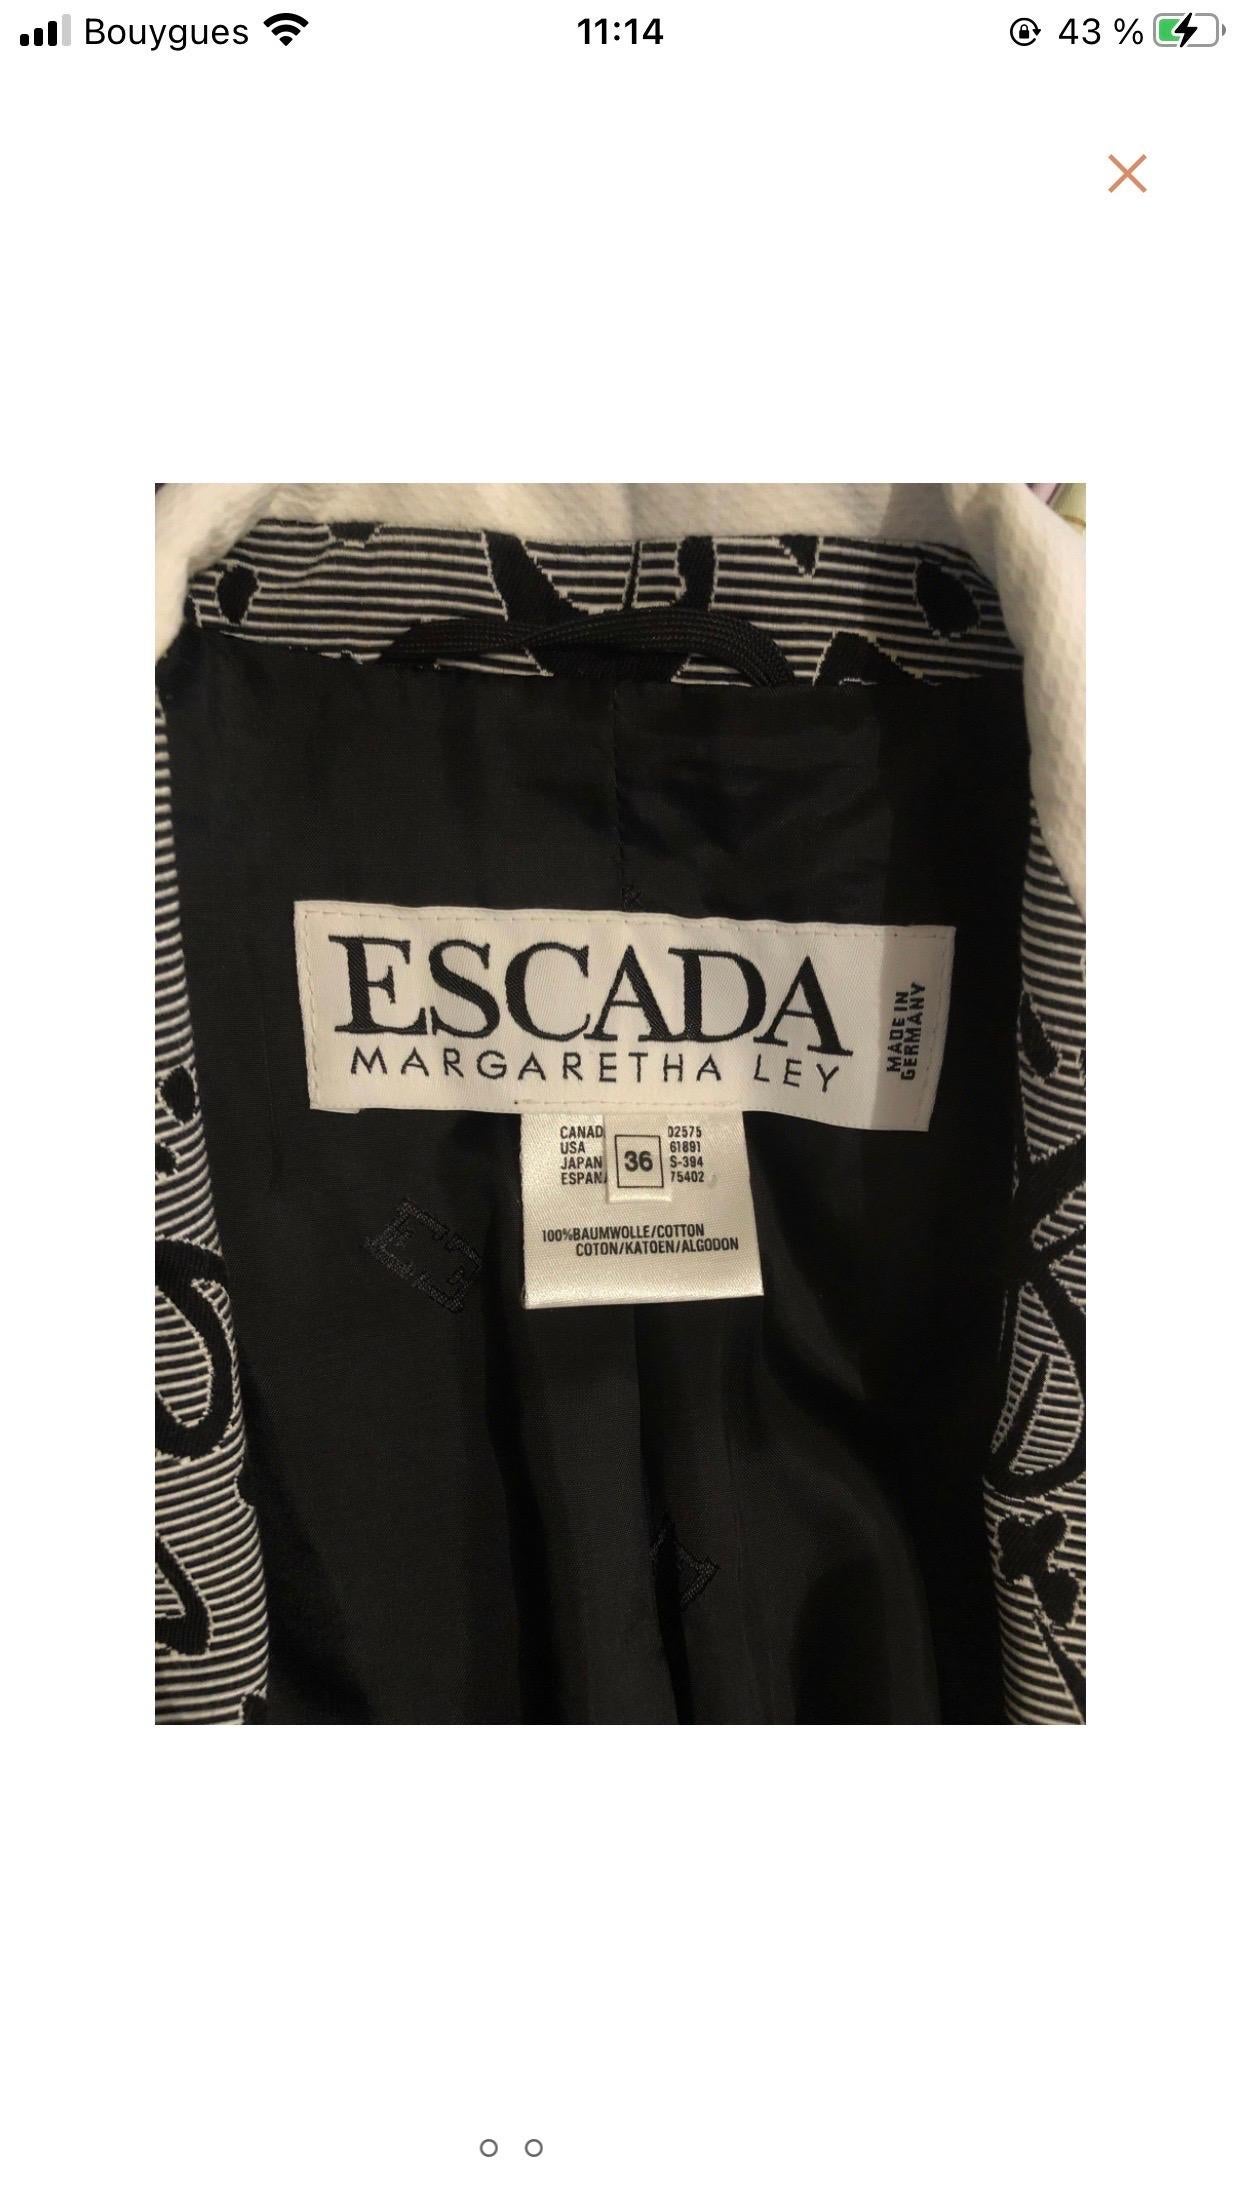 1980's 1990's Two piece woman skirt suit by Escada by Margaretha Ley, it is in immaculate condition. This suit is from the late 80s early 90s. Fabric is 100% cotton.
make sure you check the measurements.


Sizes
36 Fr
40 I
6 US
8 UK

Measurements